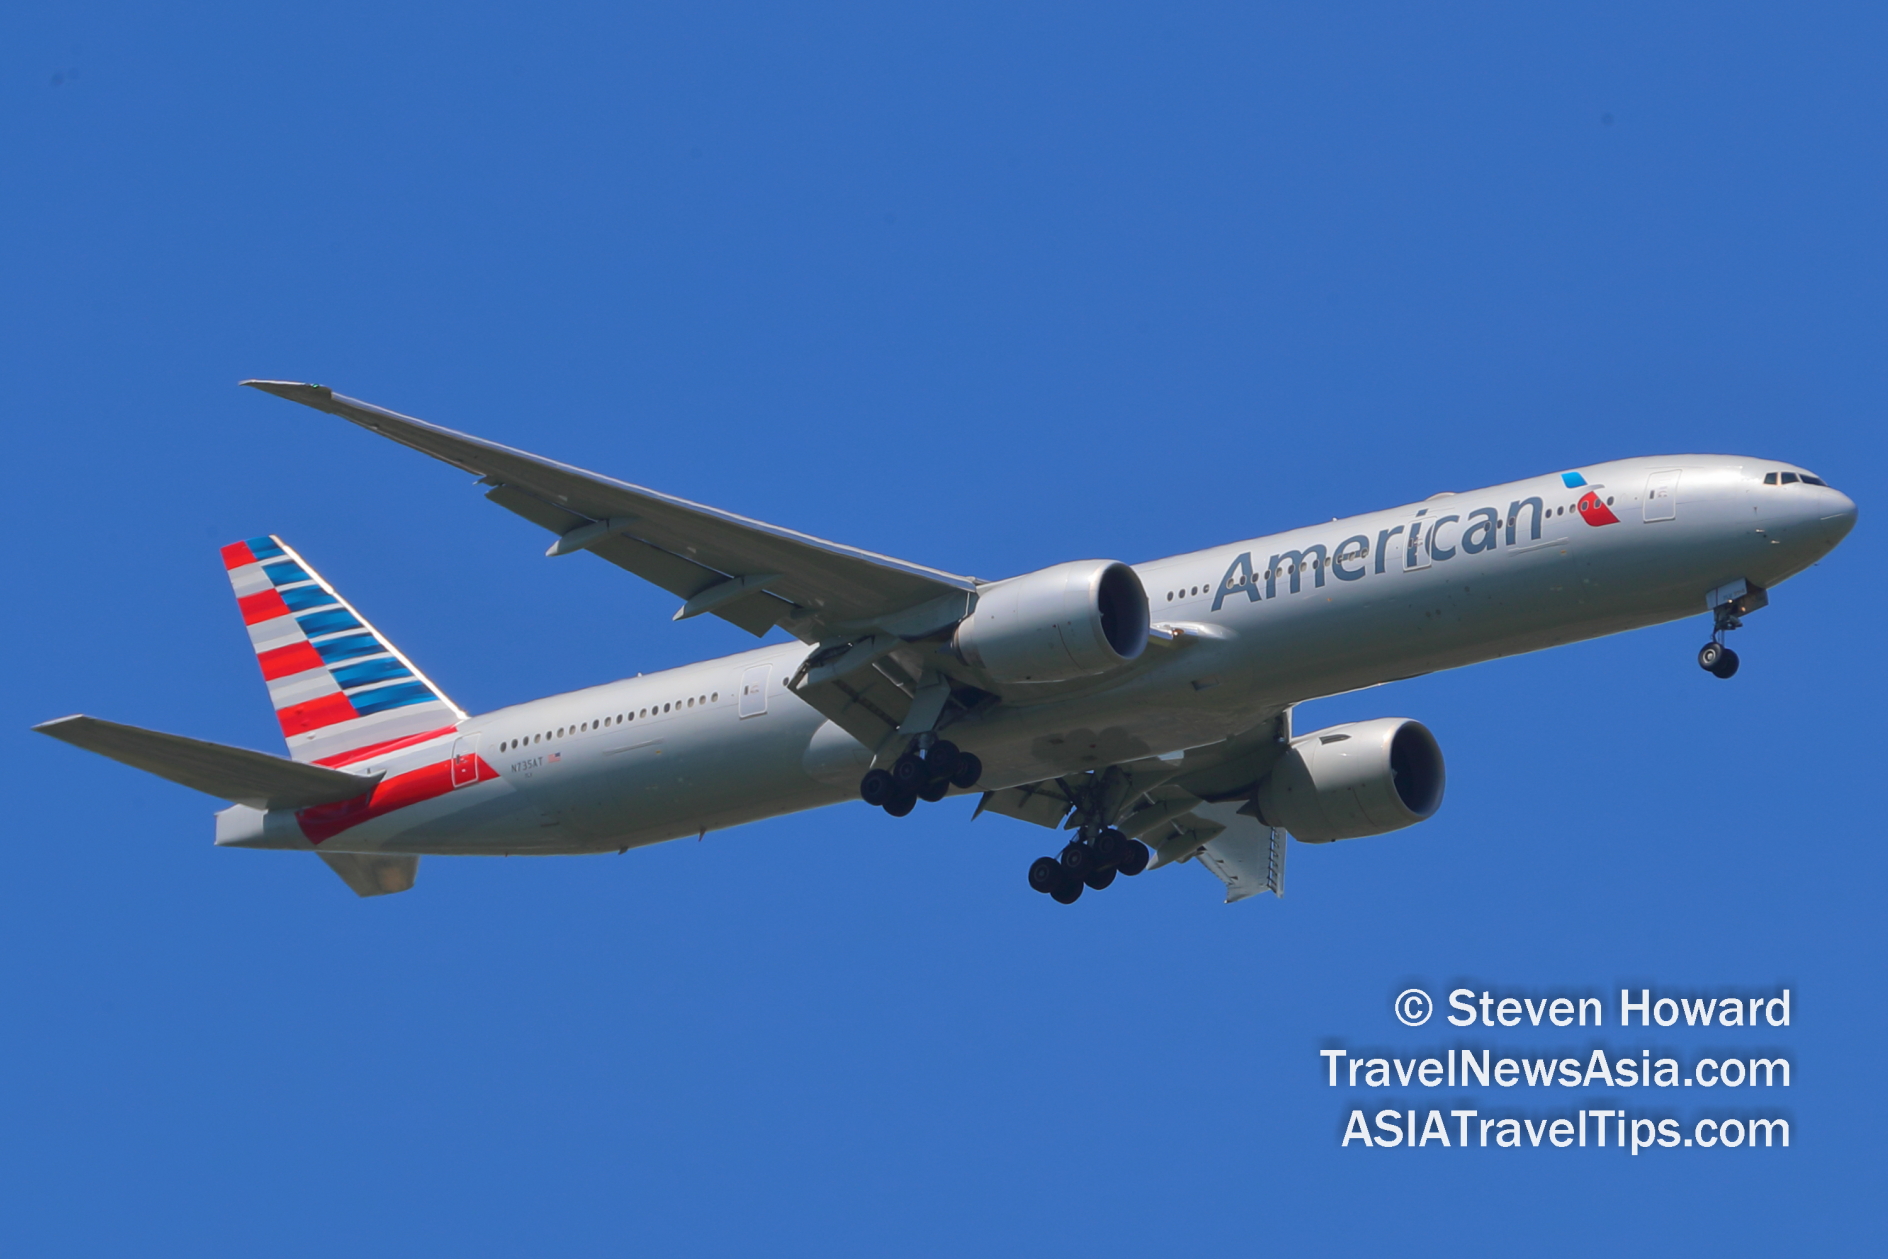 American Airlines Boeing 777 reg: N735AT. Picture by Steven Howard of TravelNewsAsia.com Click to enlarge.